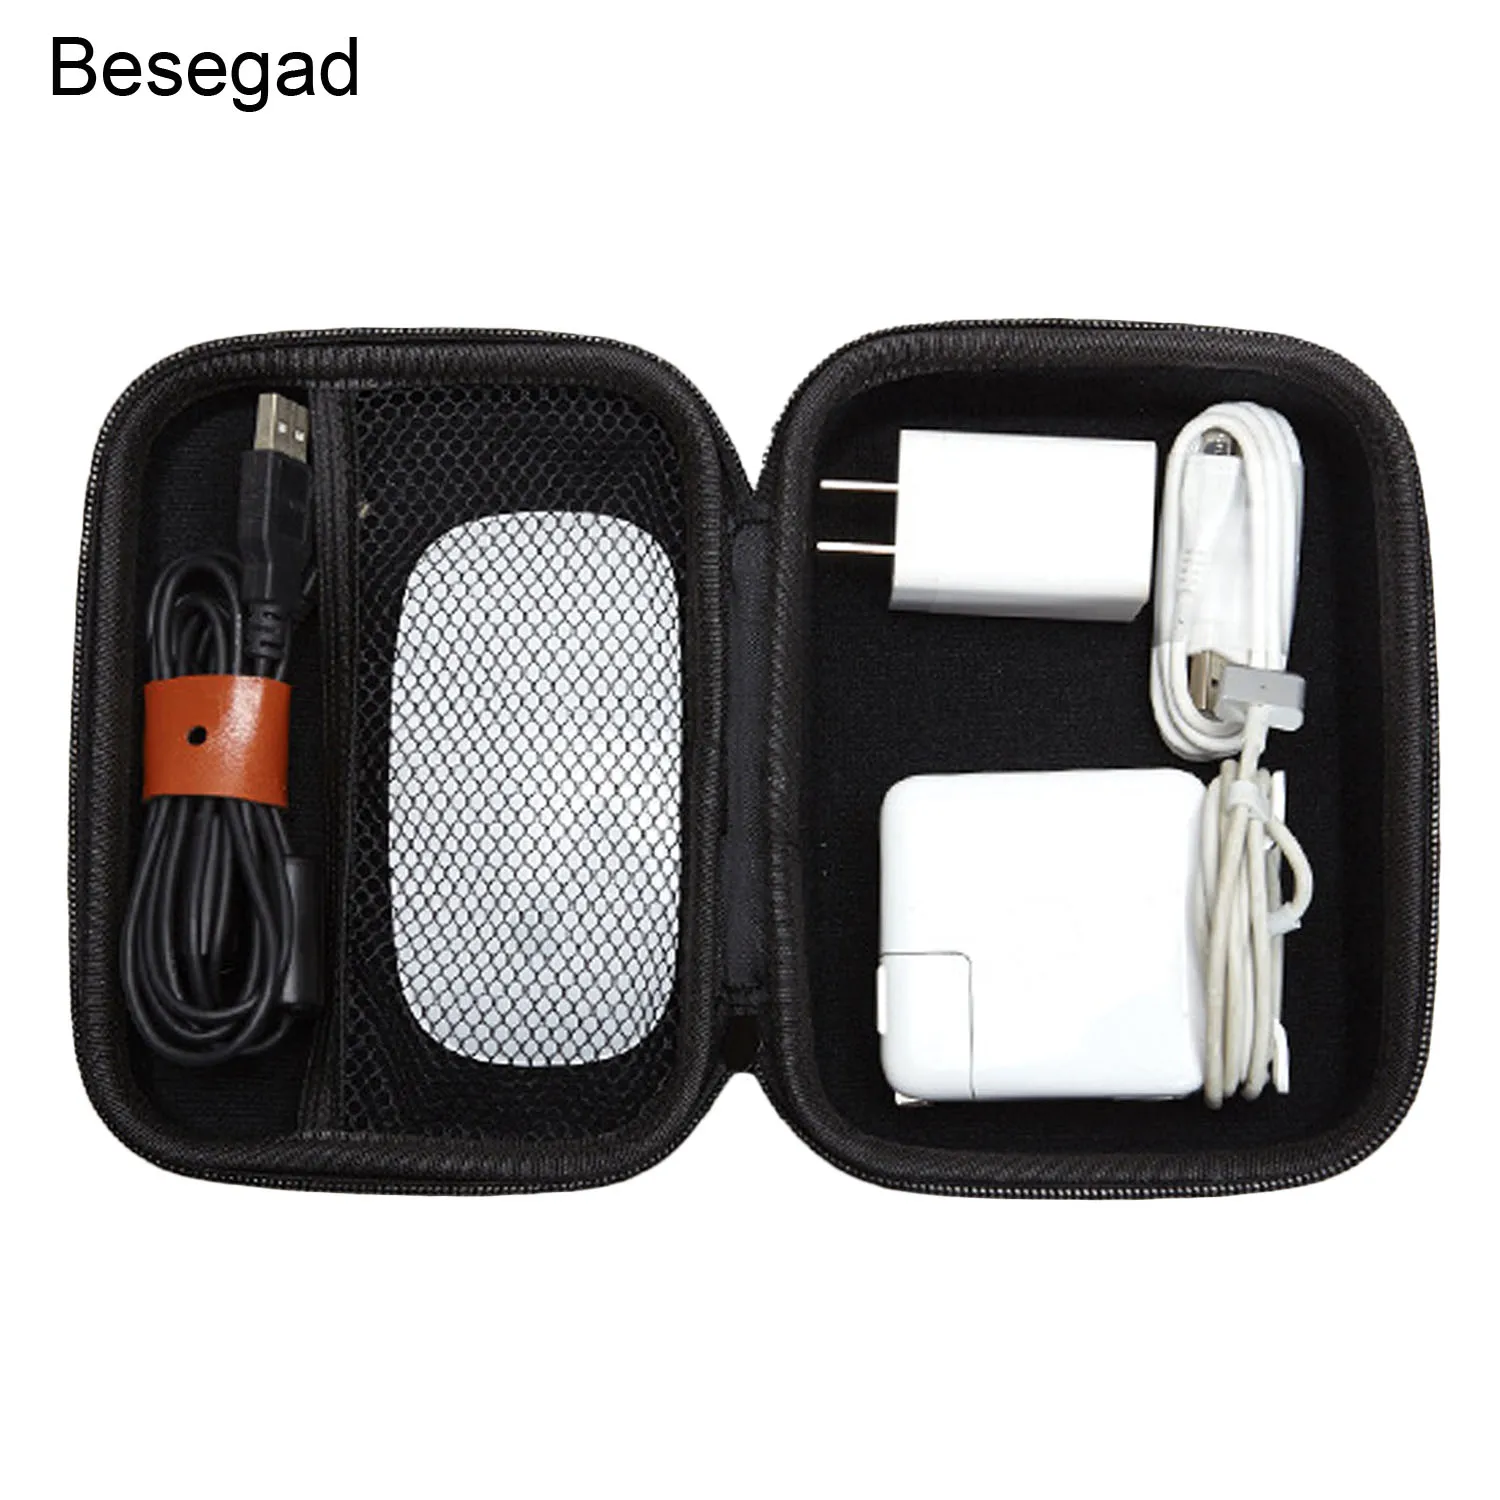 Besegad Hard EVA Portable Travel Carrying Protective Storage Case Bag For Apple pencil Laptop Power Adapter Mouse Accessories | Мобильные